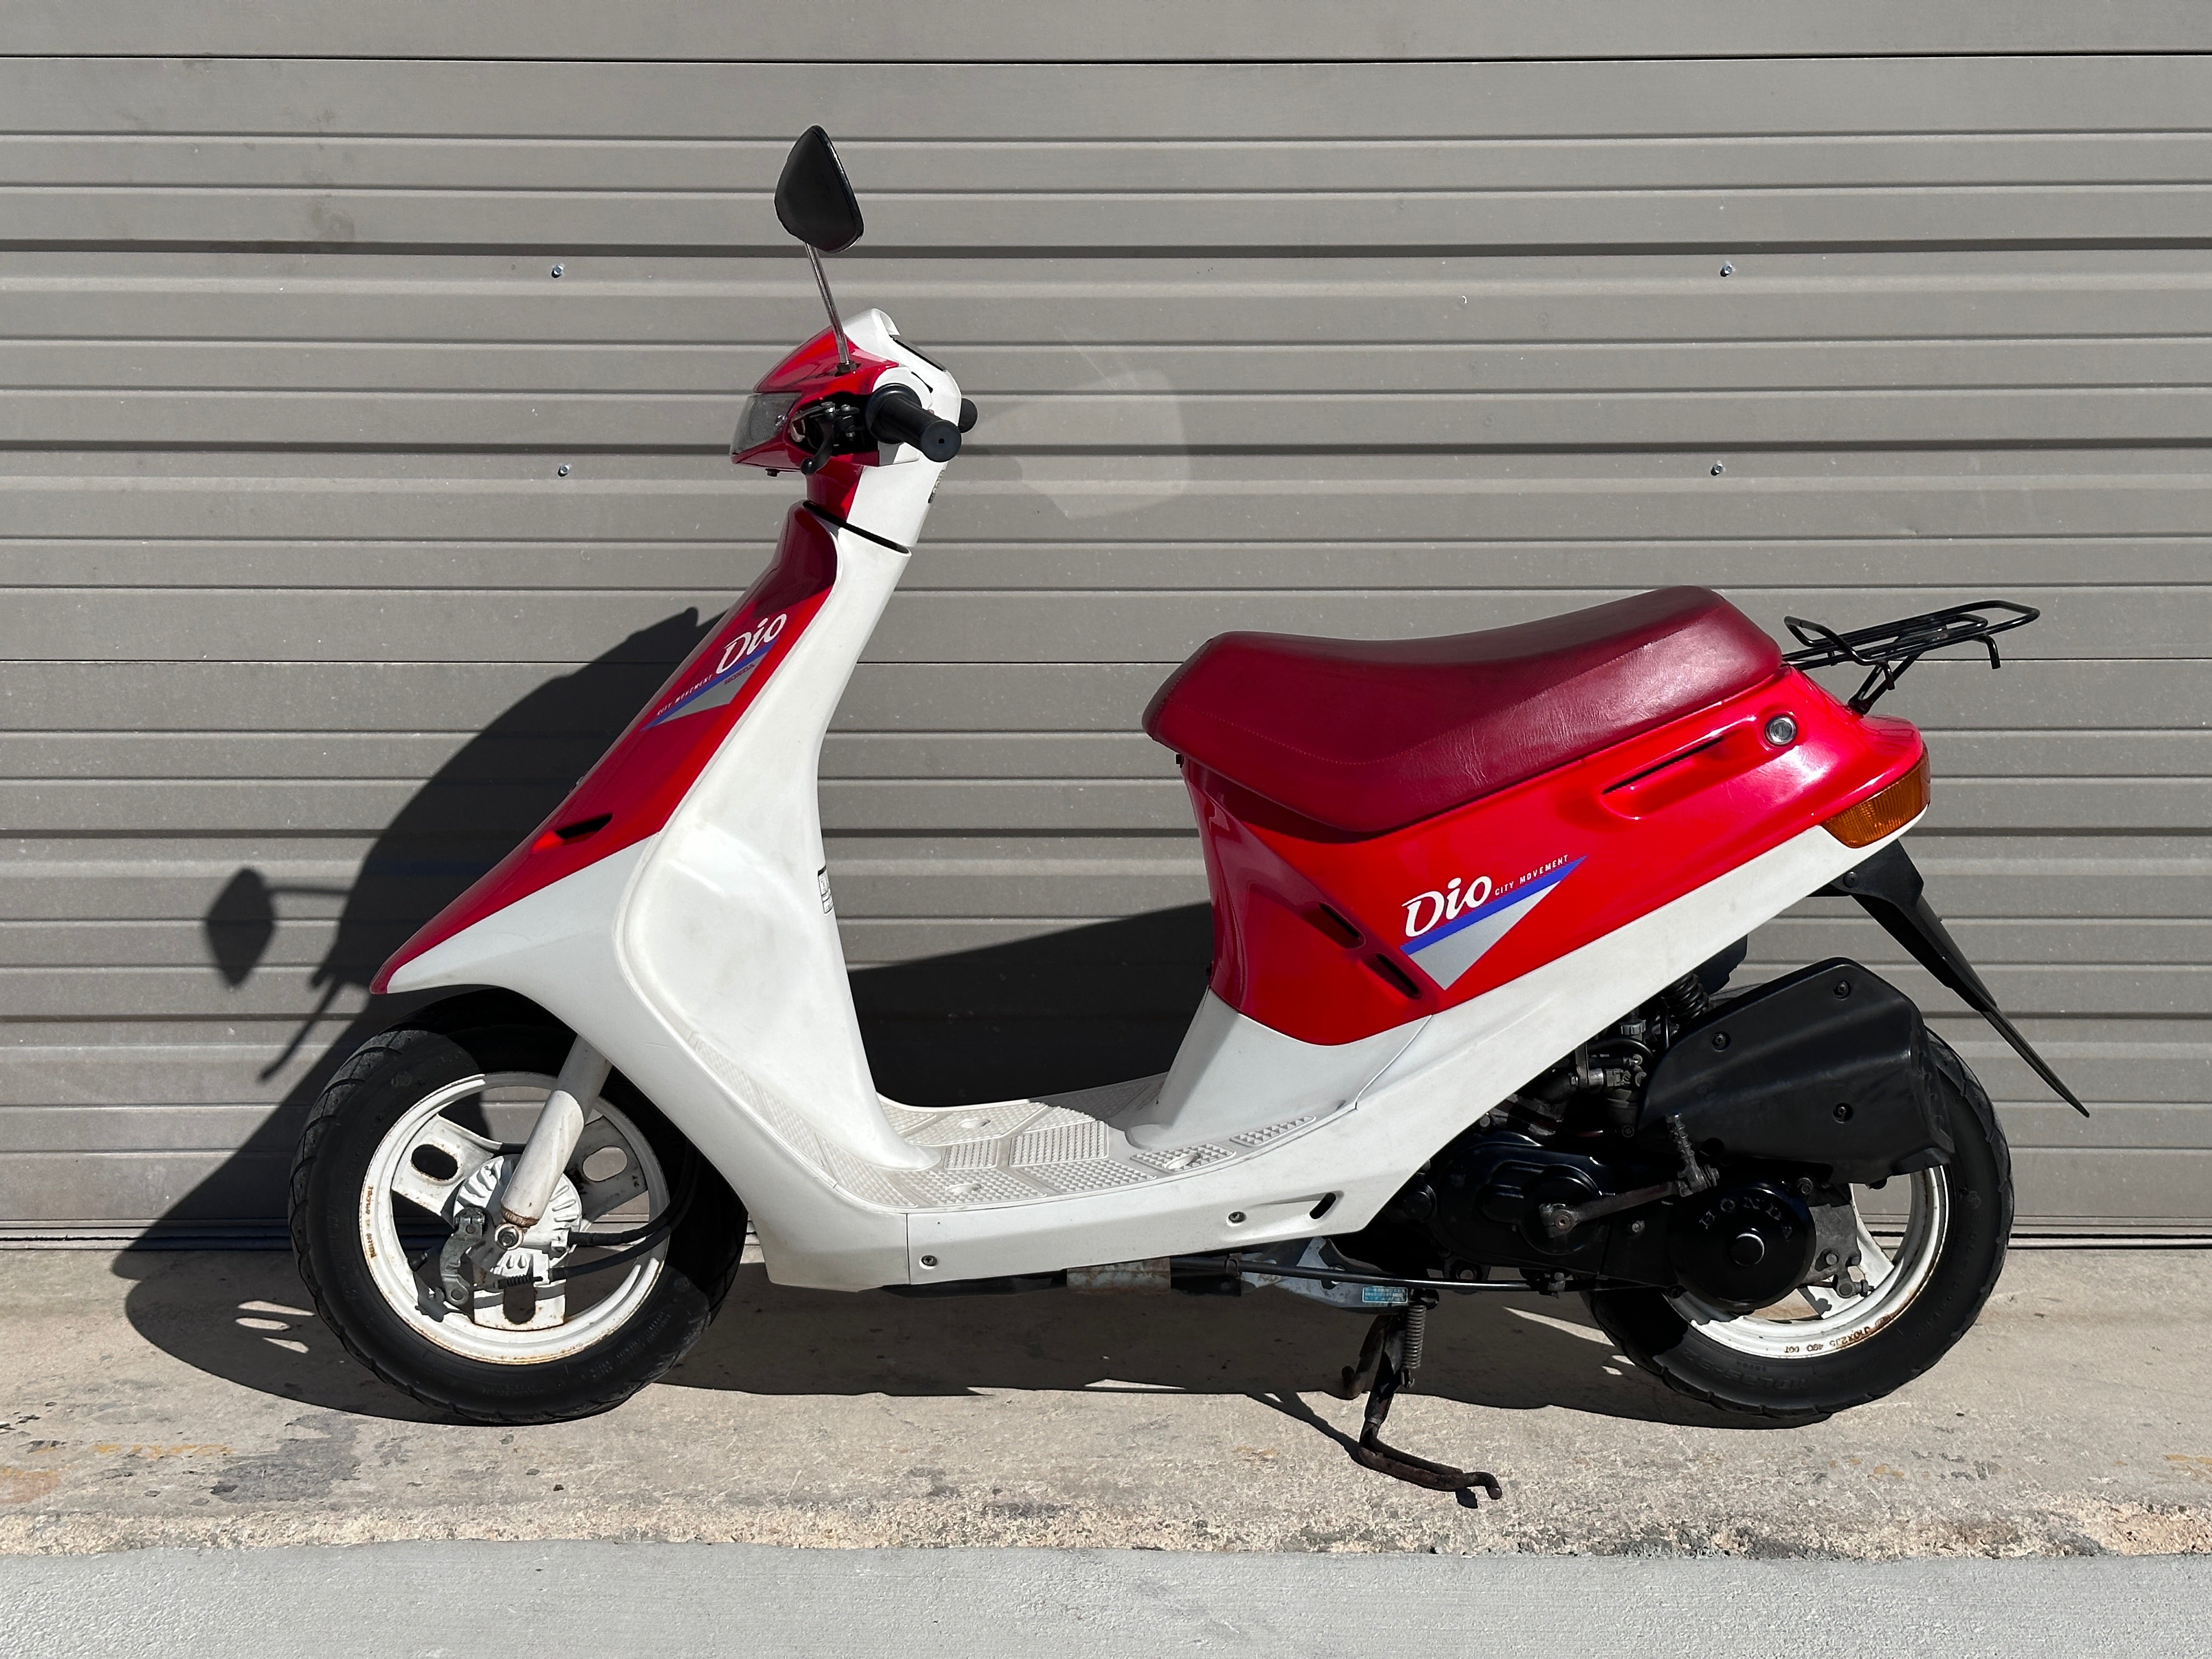 vedtage Tranquility ambulance 1989 Honda Dio AF18 JDM Scooter – Cycle Refinery